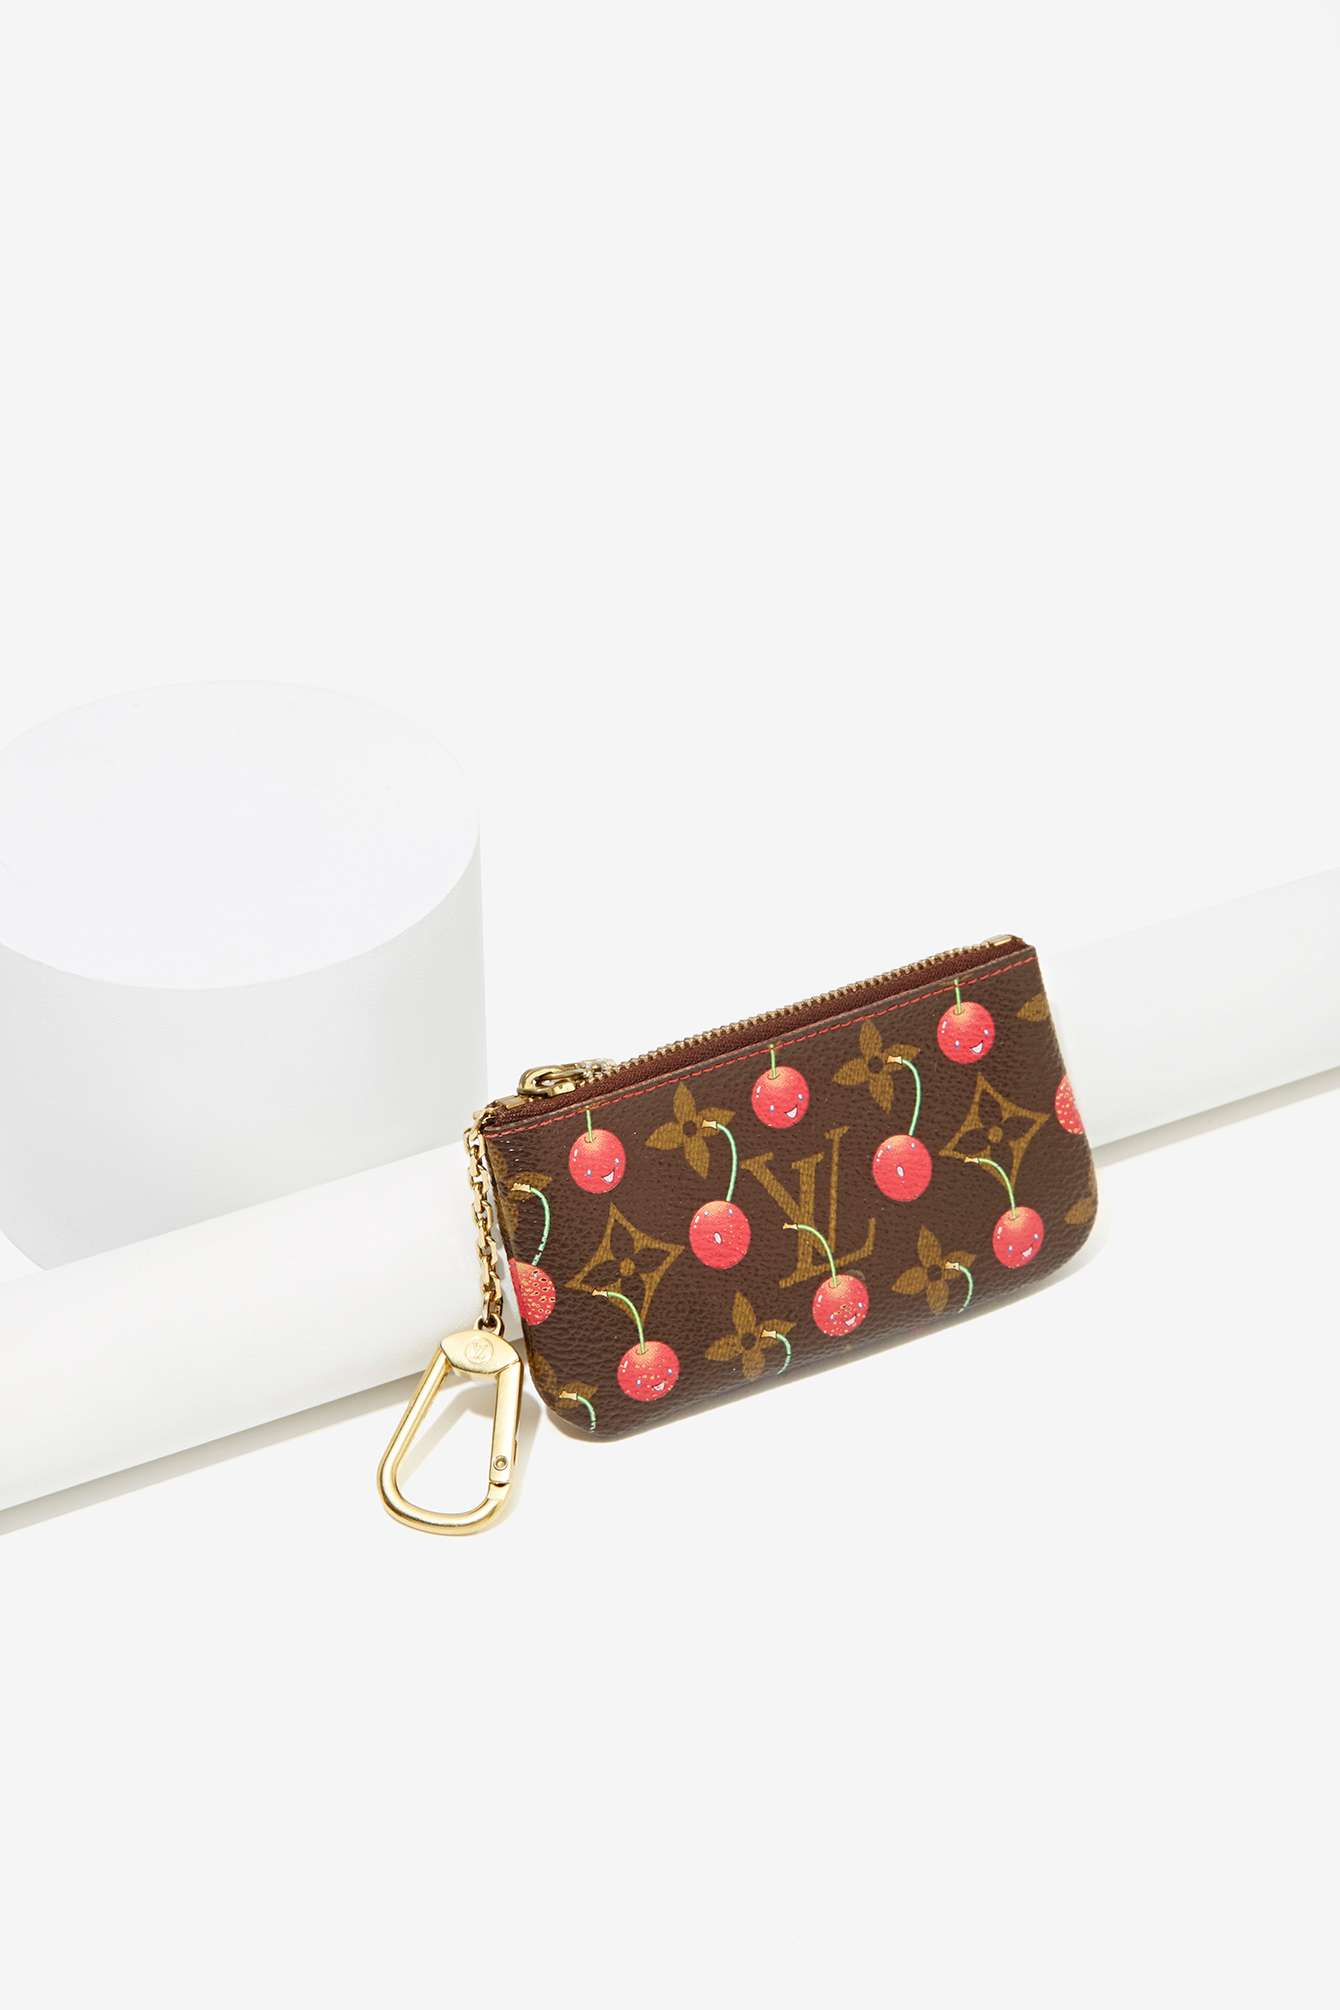 Lyst - Nasty Gal Vintage Louis Vuitton Cherries Leather Coin Purse in Brown